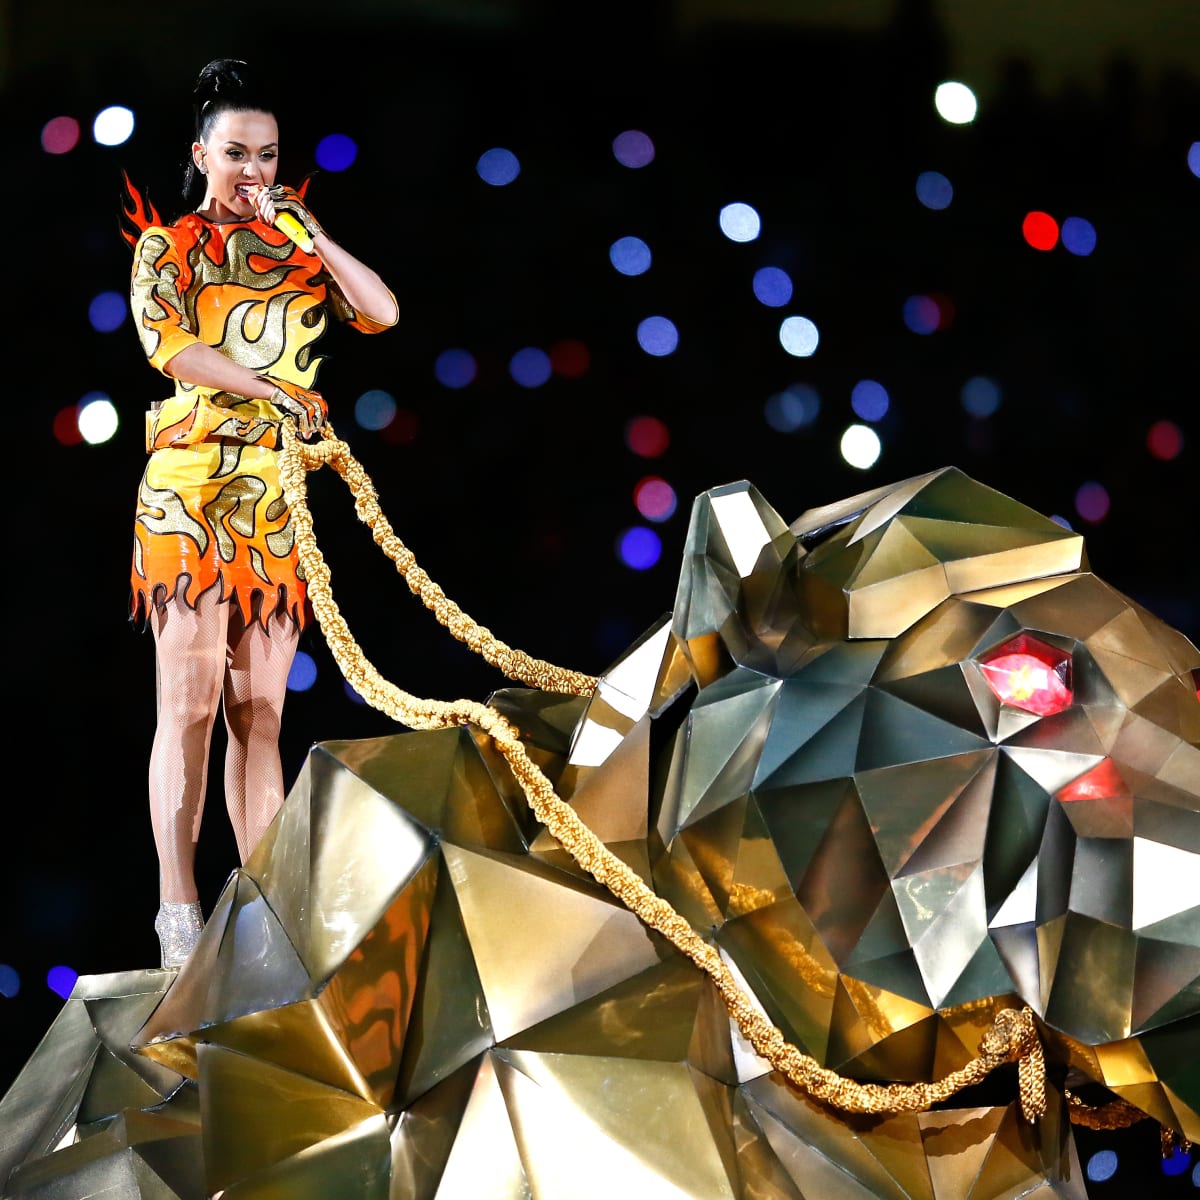 Katy Perry halftime show: Super Bowl 2015 performance - Sports Illustrated